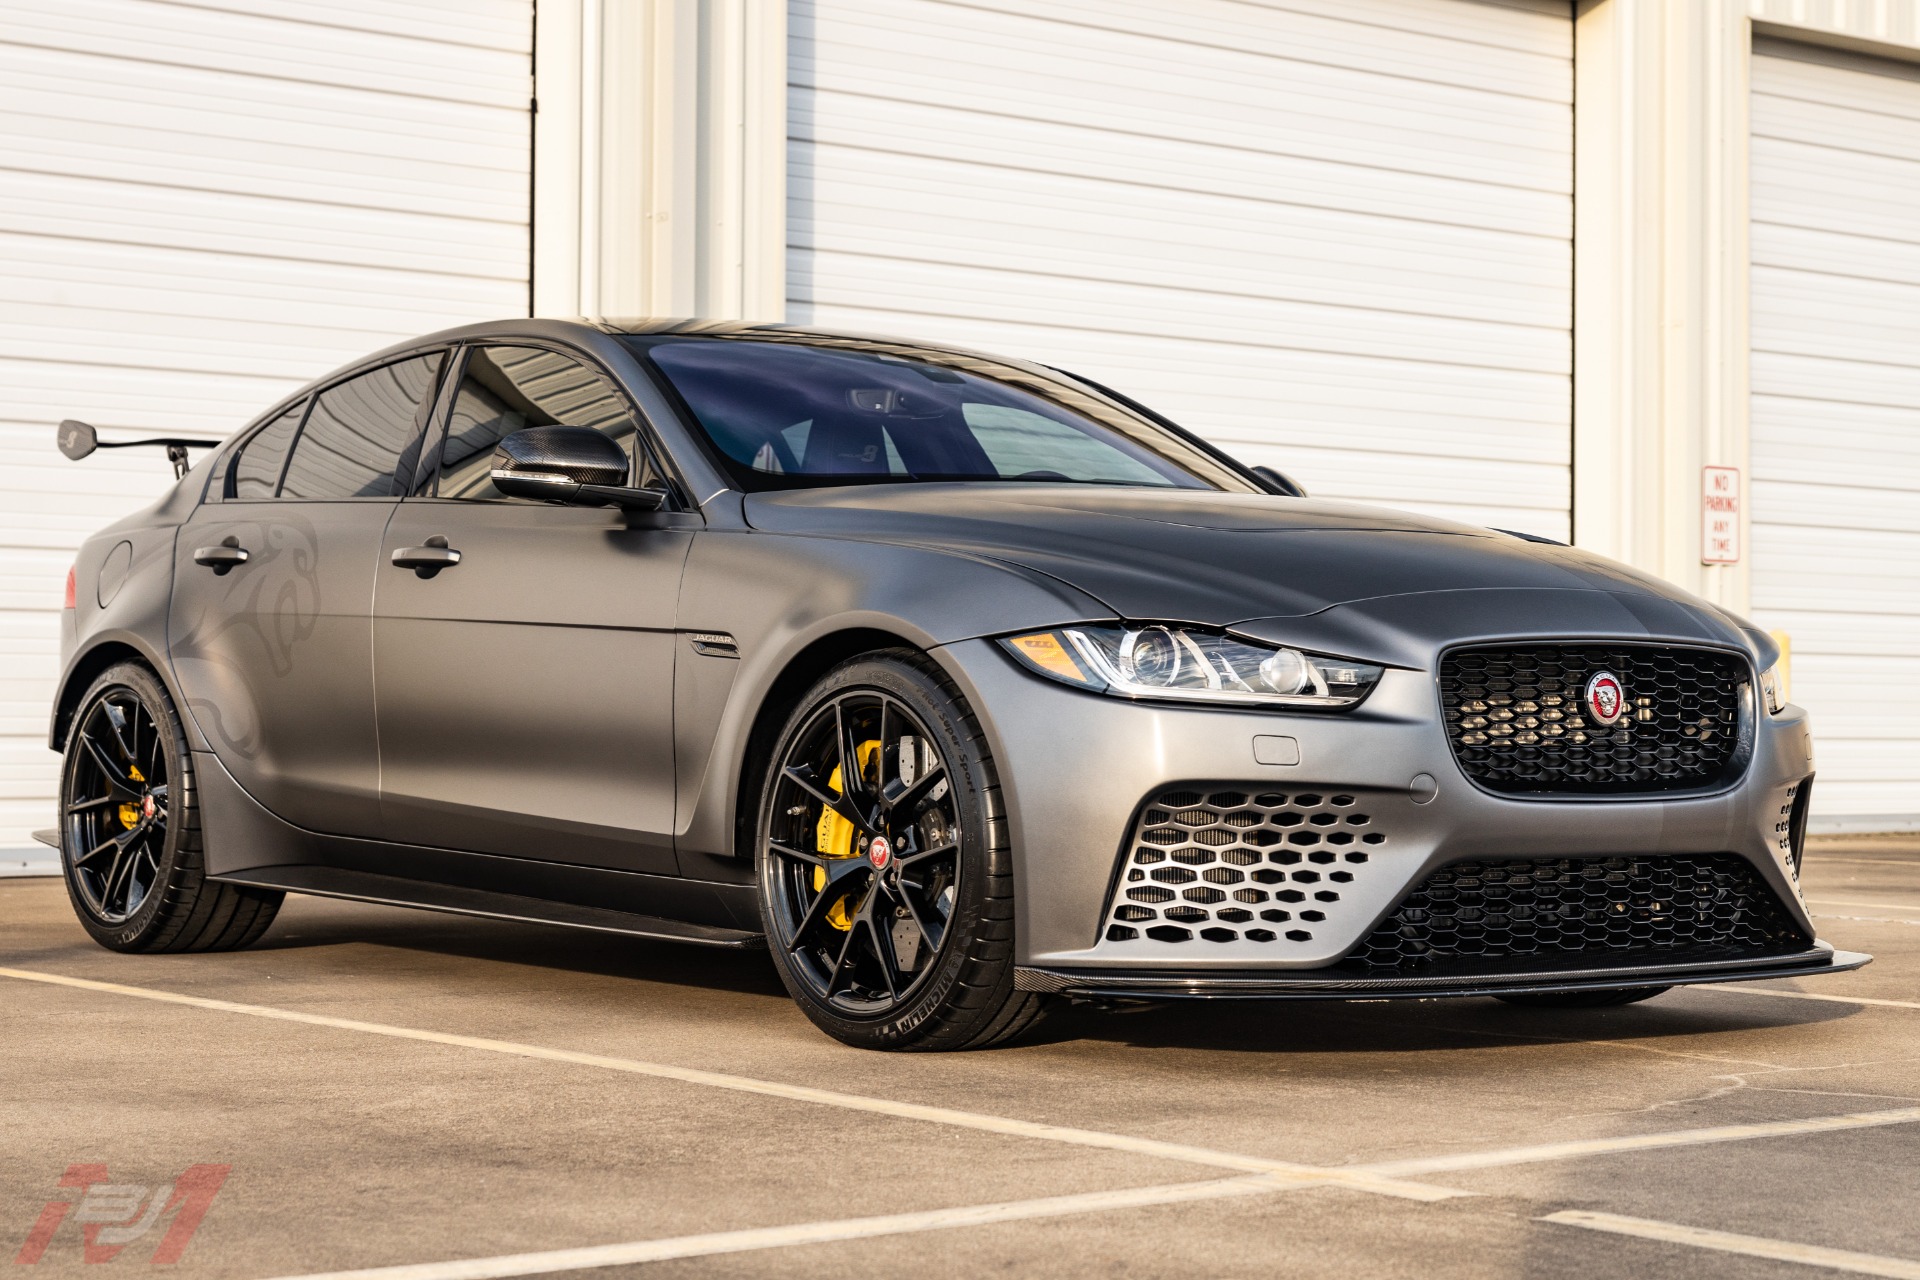 Used 2019 Jaguar XE SV Project 8 For Sale (Special Pricing)